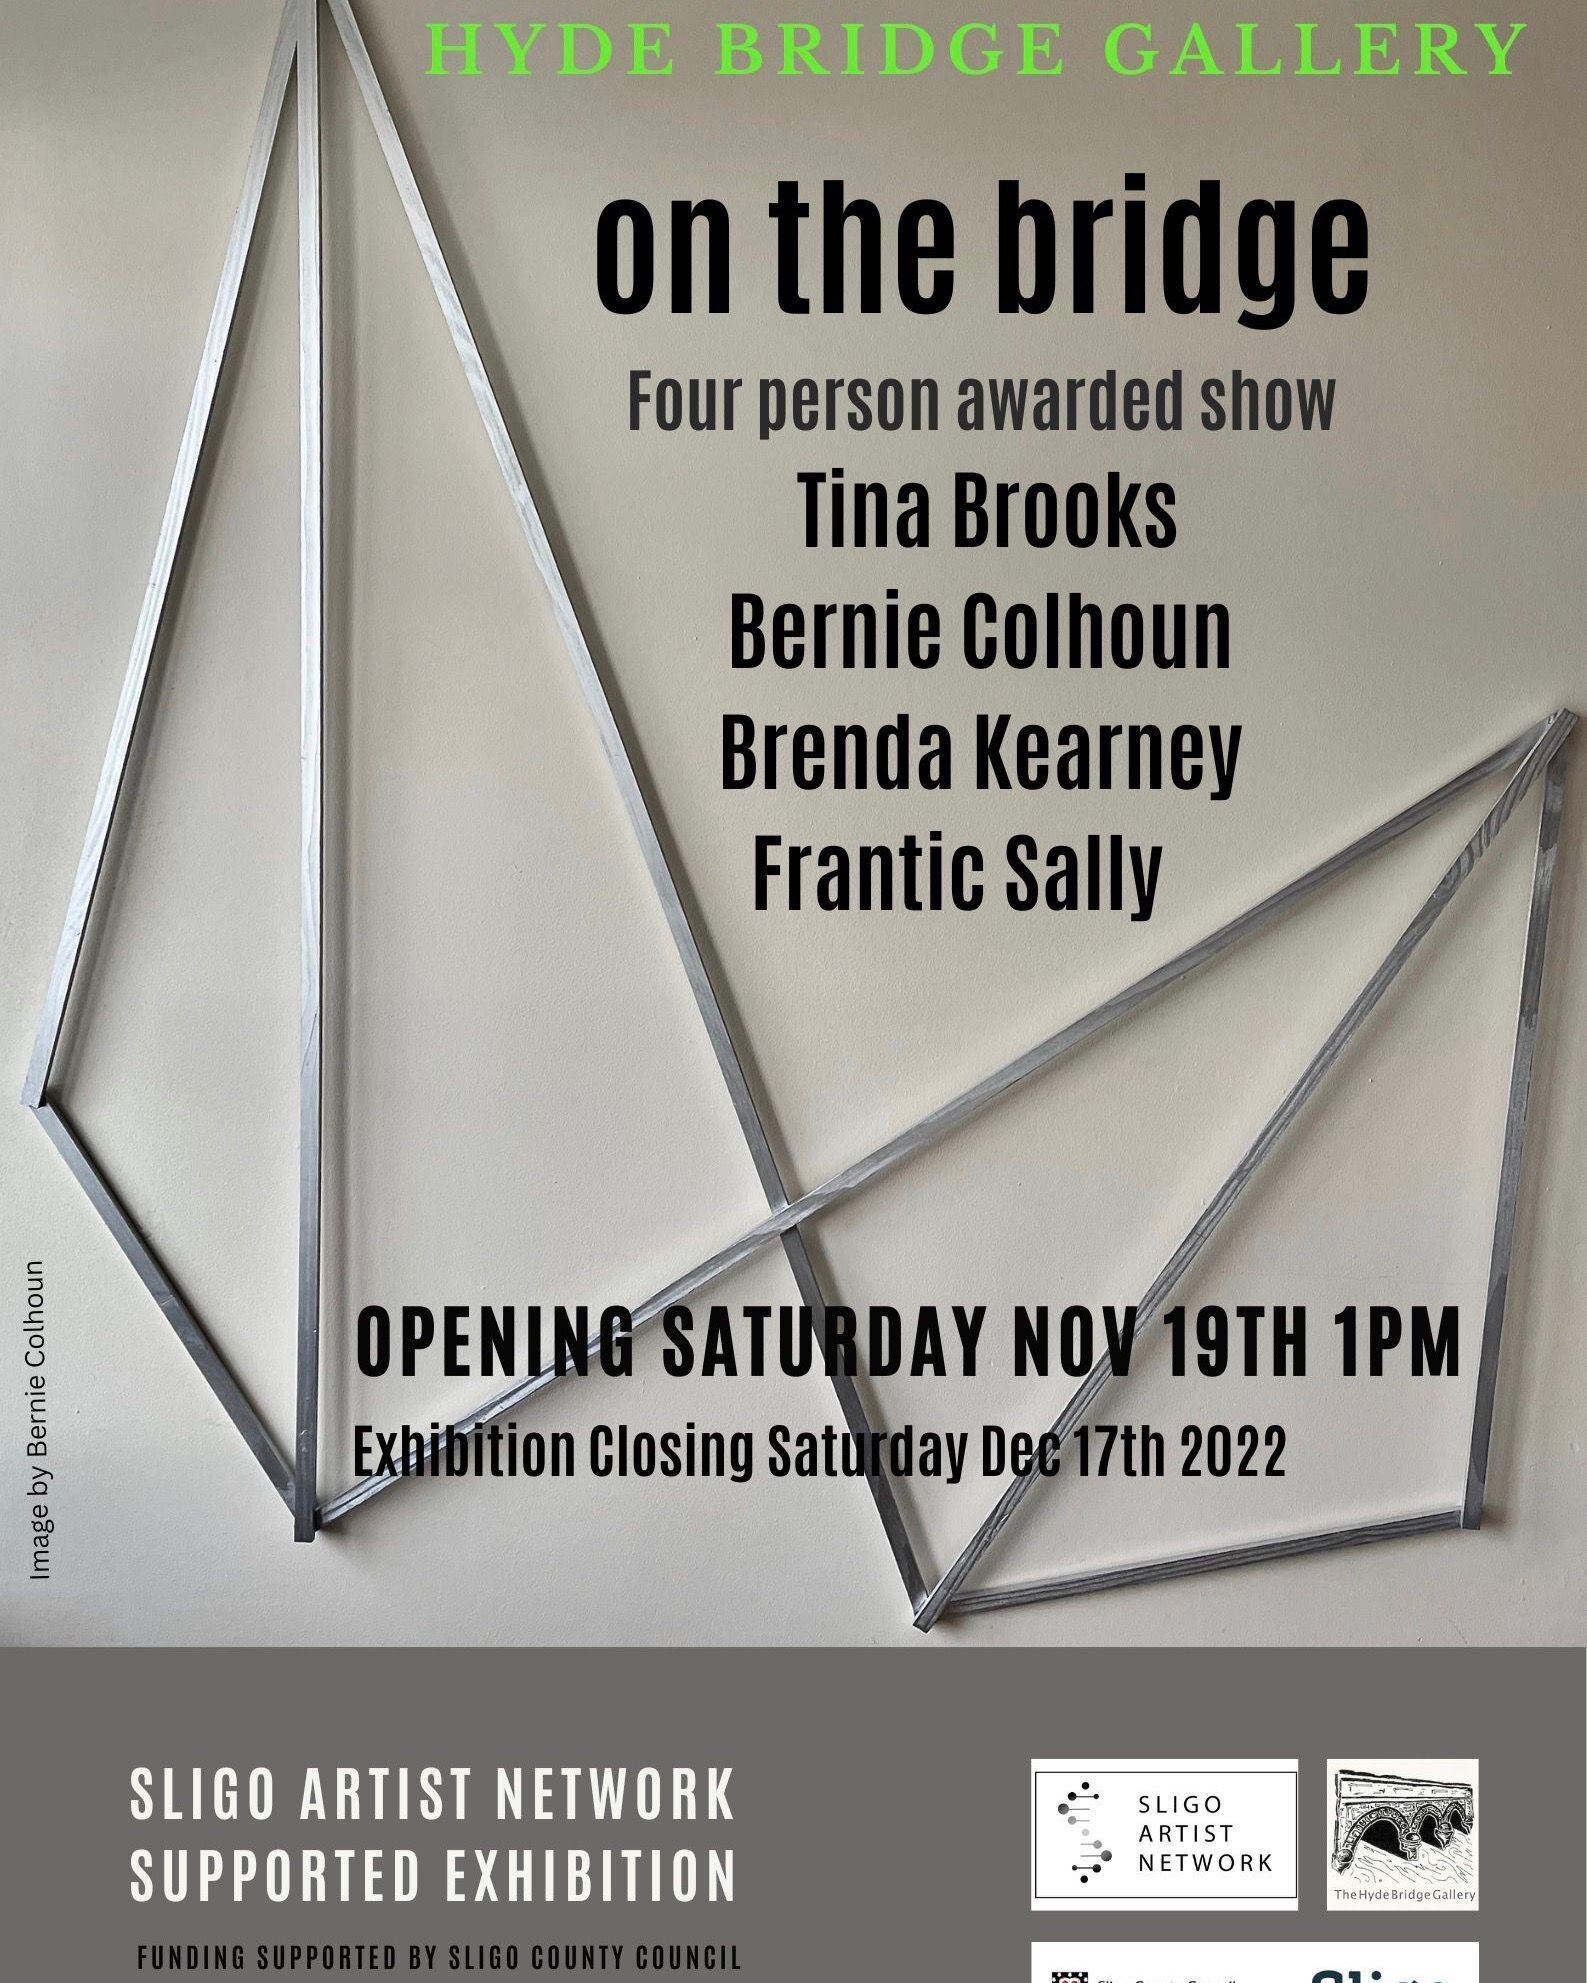 Here is the confirmed details to my upcoming group exhibition 'on the bridge', opening Sat 19th Nov at 1pm 😊 at the Hyde Bridge Gallery in Sligo. You are invited to come along, meet myself and the other wonderful artists and see some great art on a 